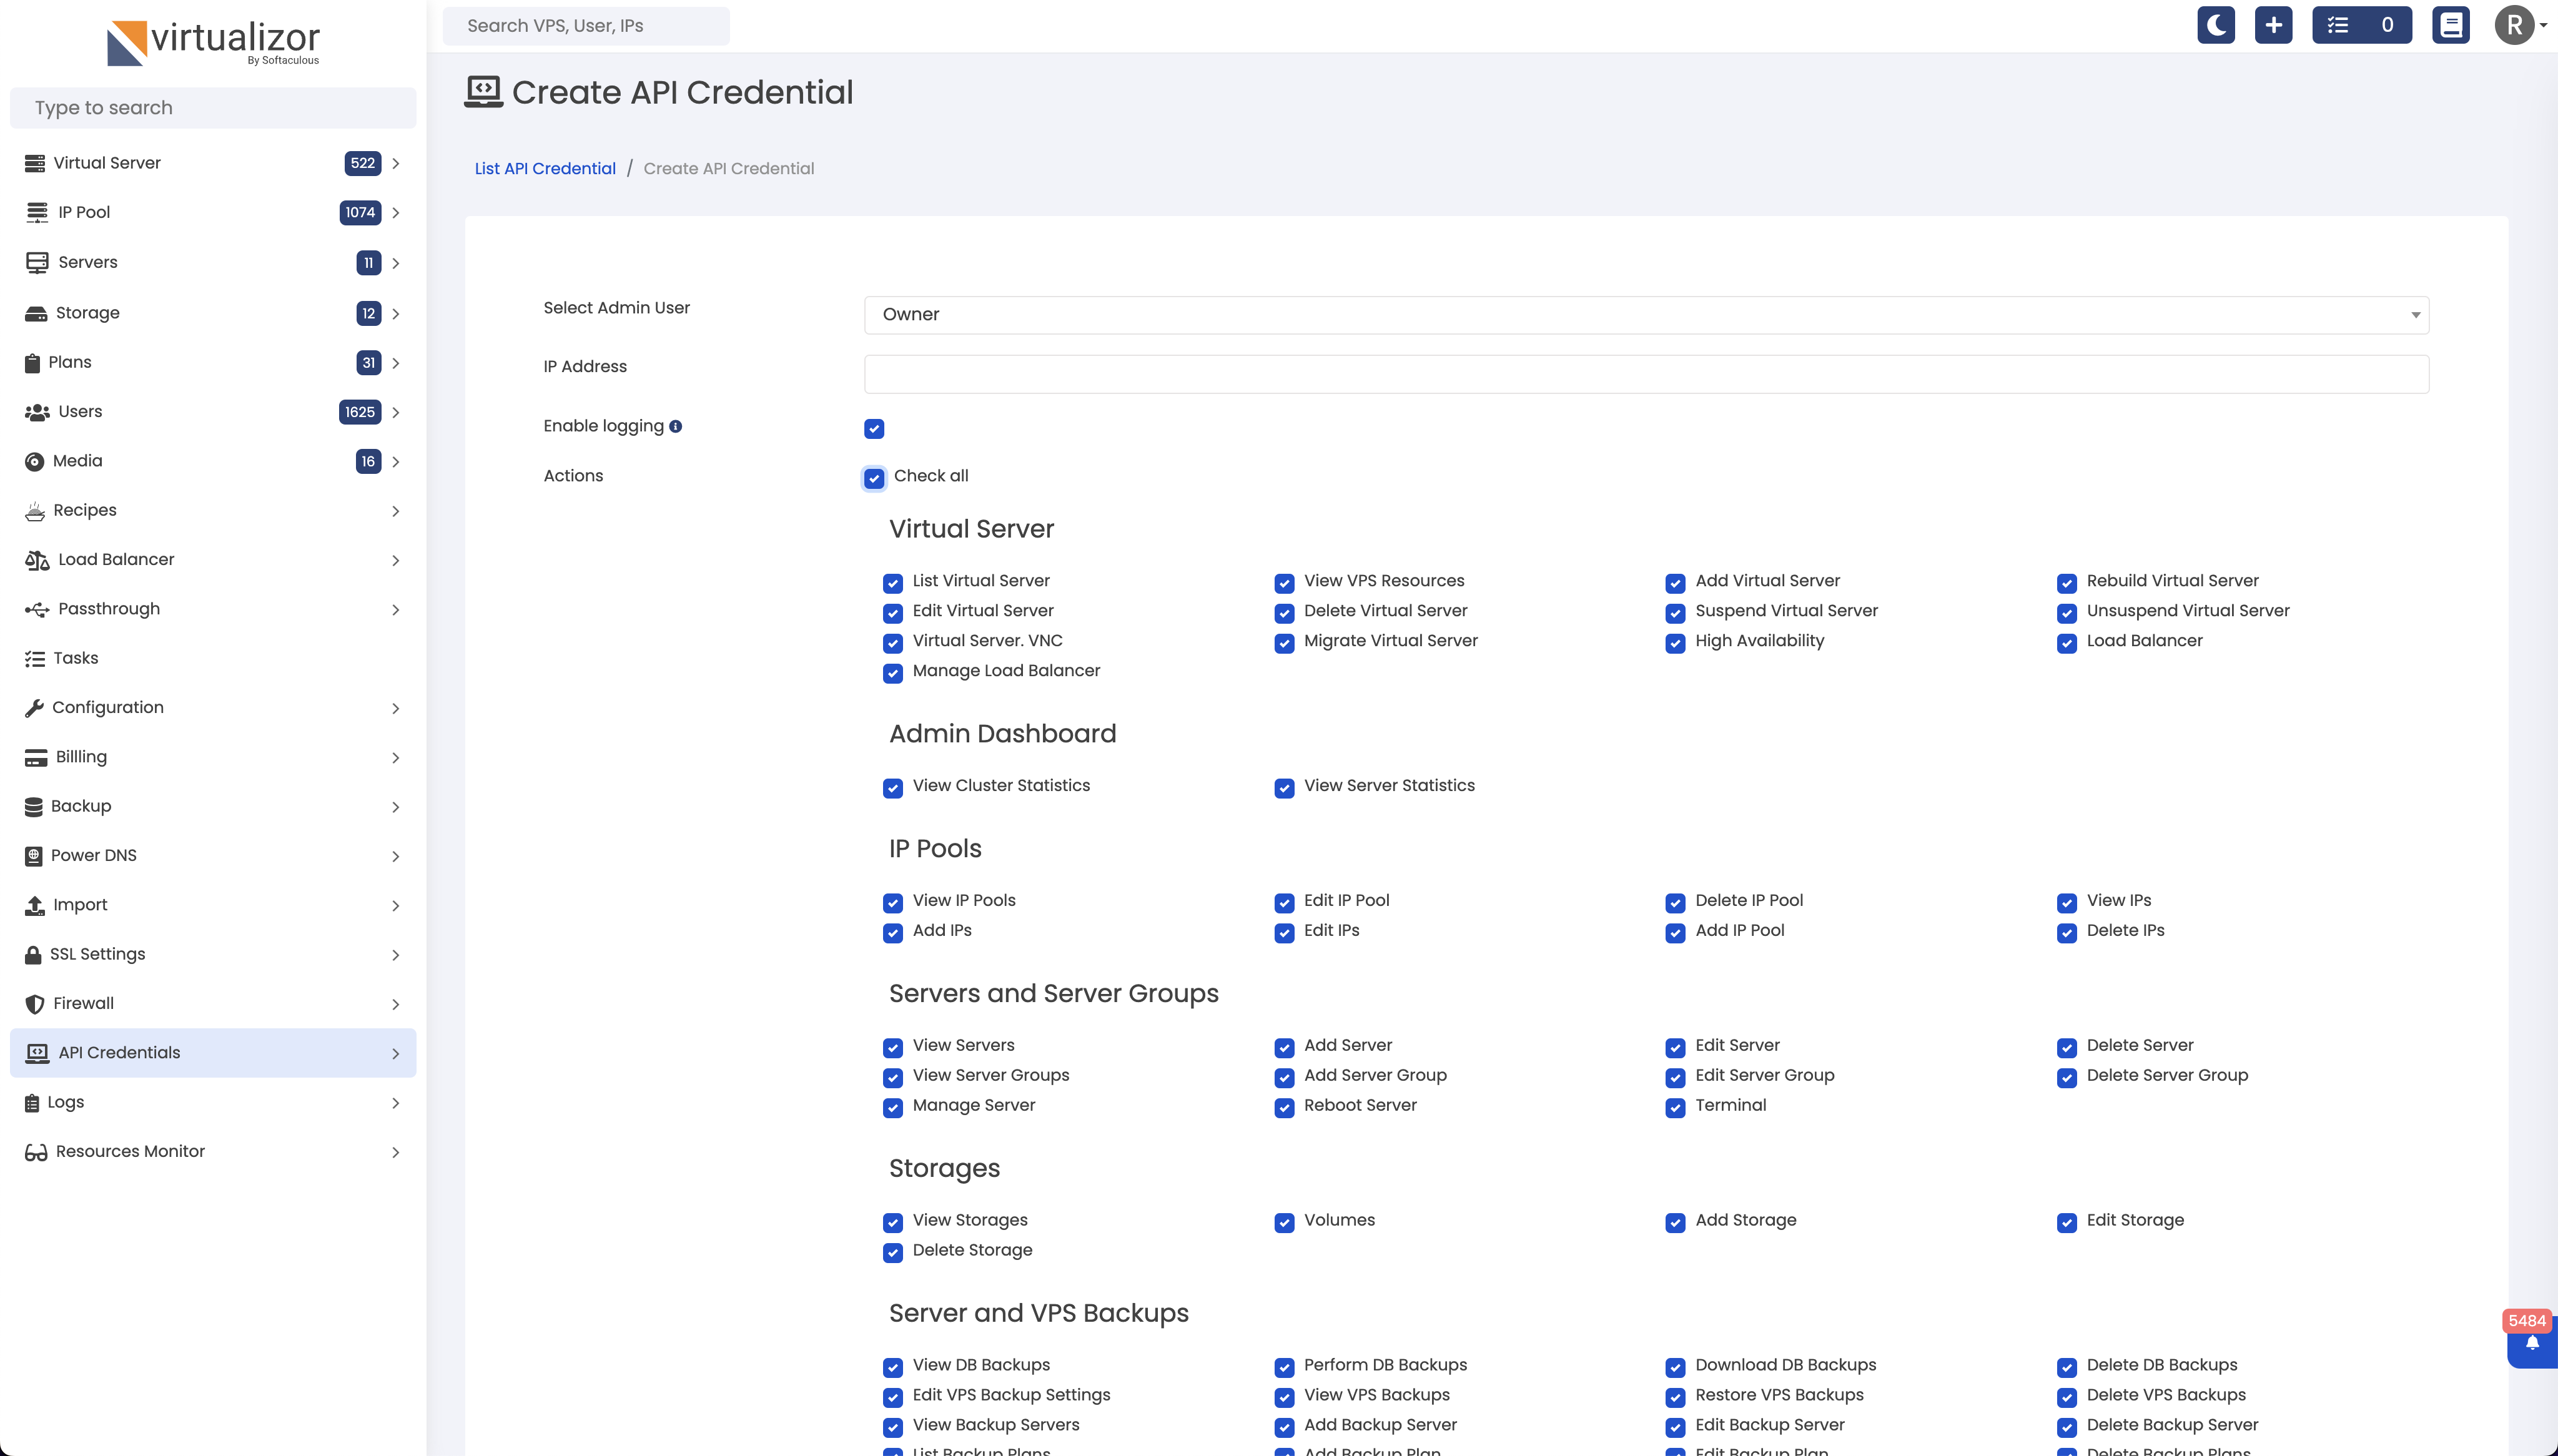 Create API Credential for an Admin User with access to all Actions